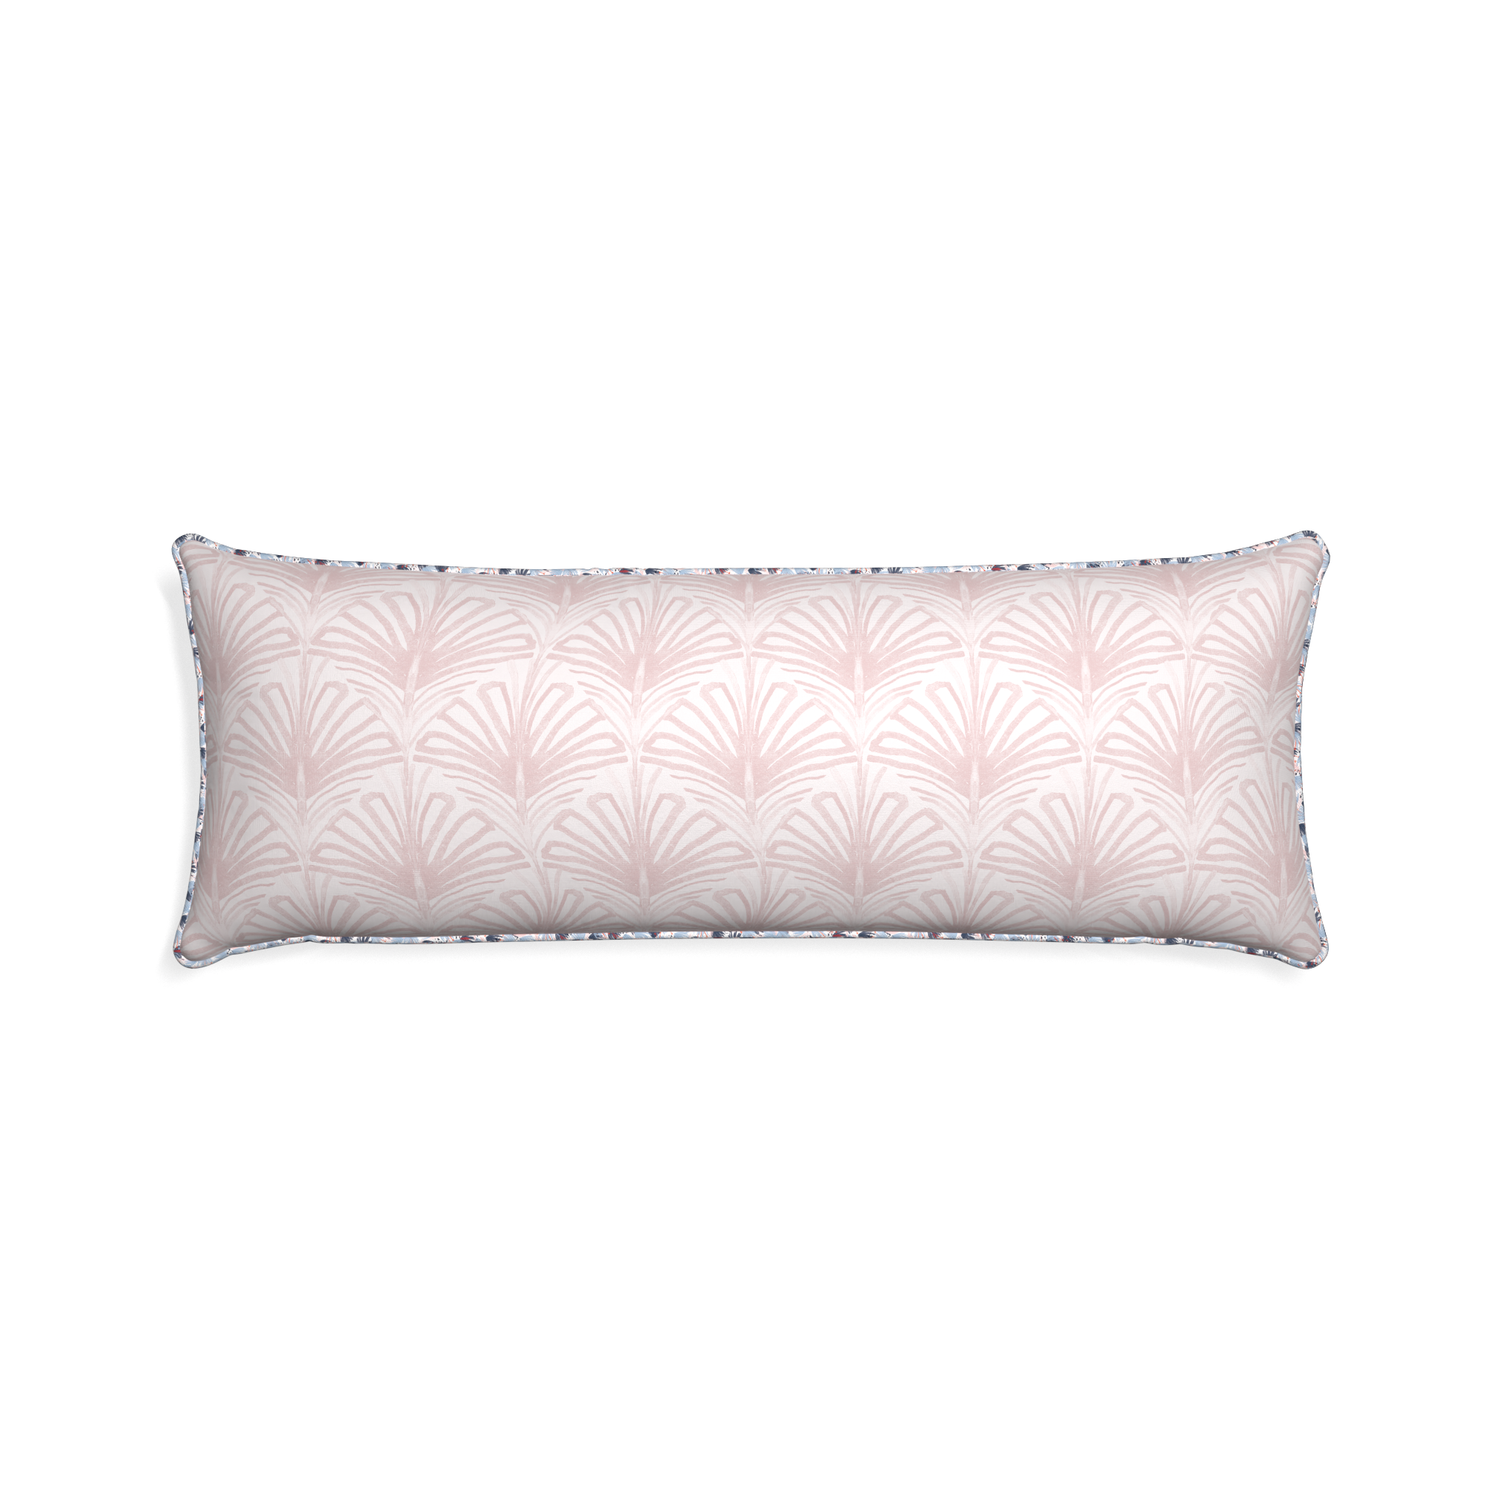 Xl-lumbar suzy rose custom pillow with e piping on white background